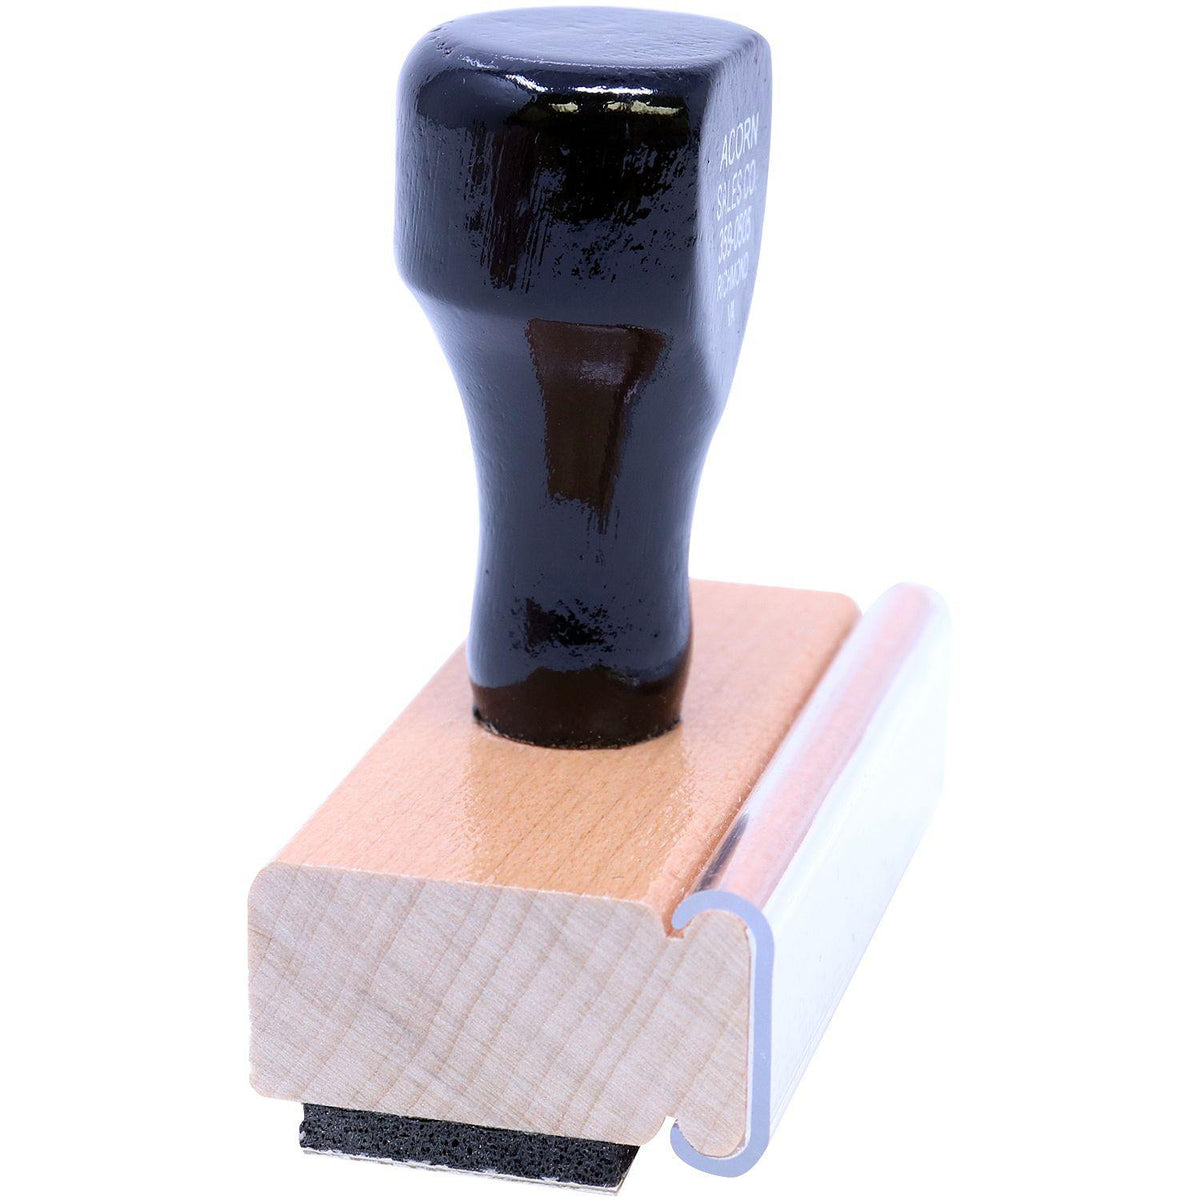 Side View of Covid-19 Test Pending Rubber Stamp at an Angle